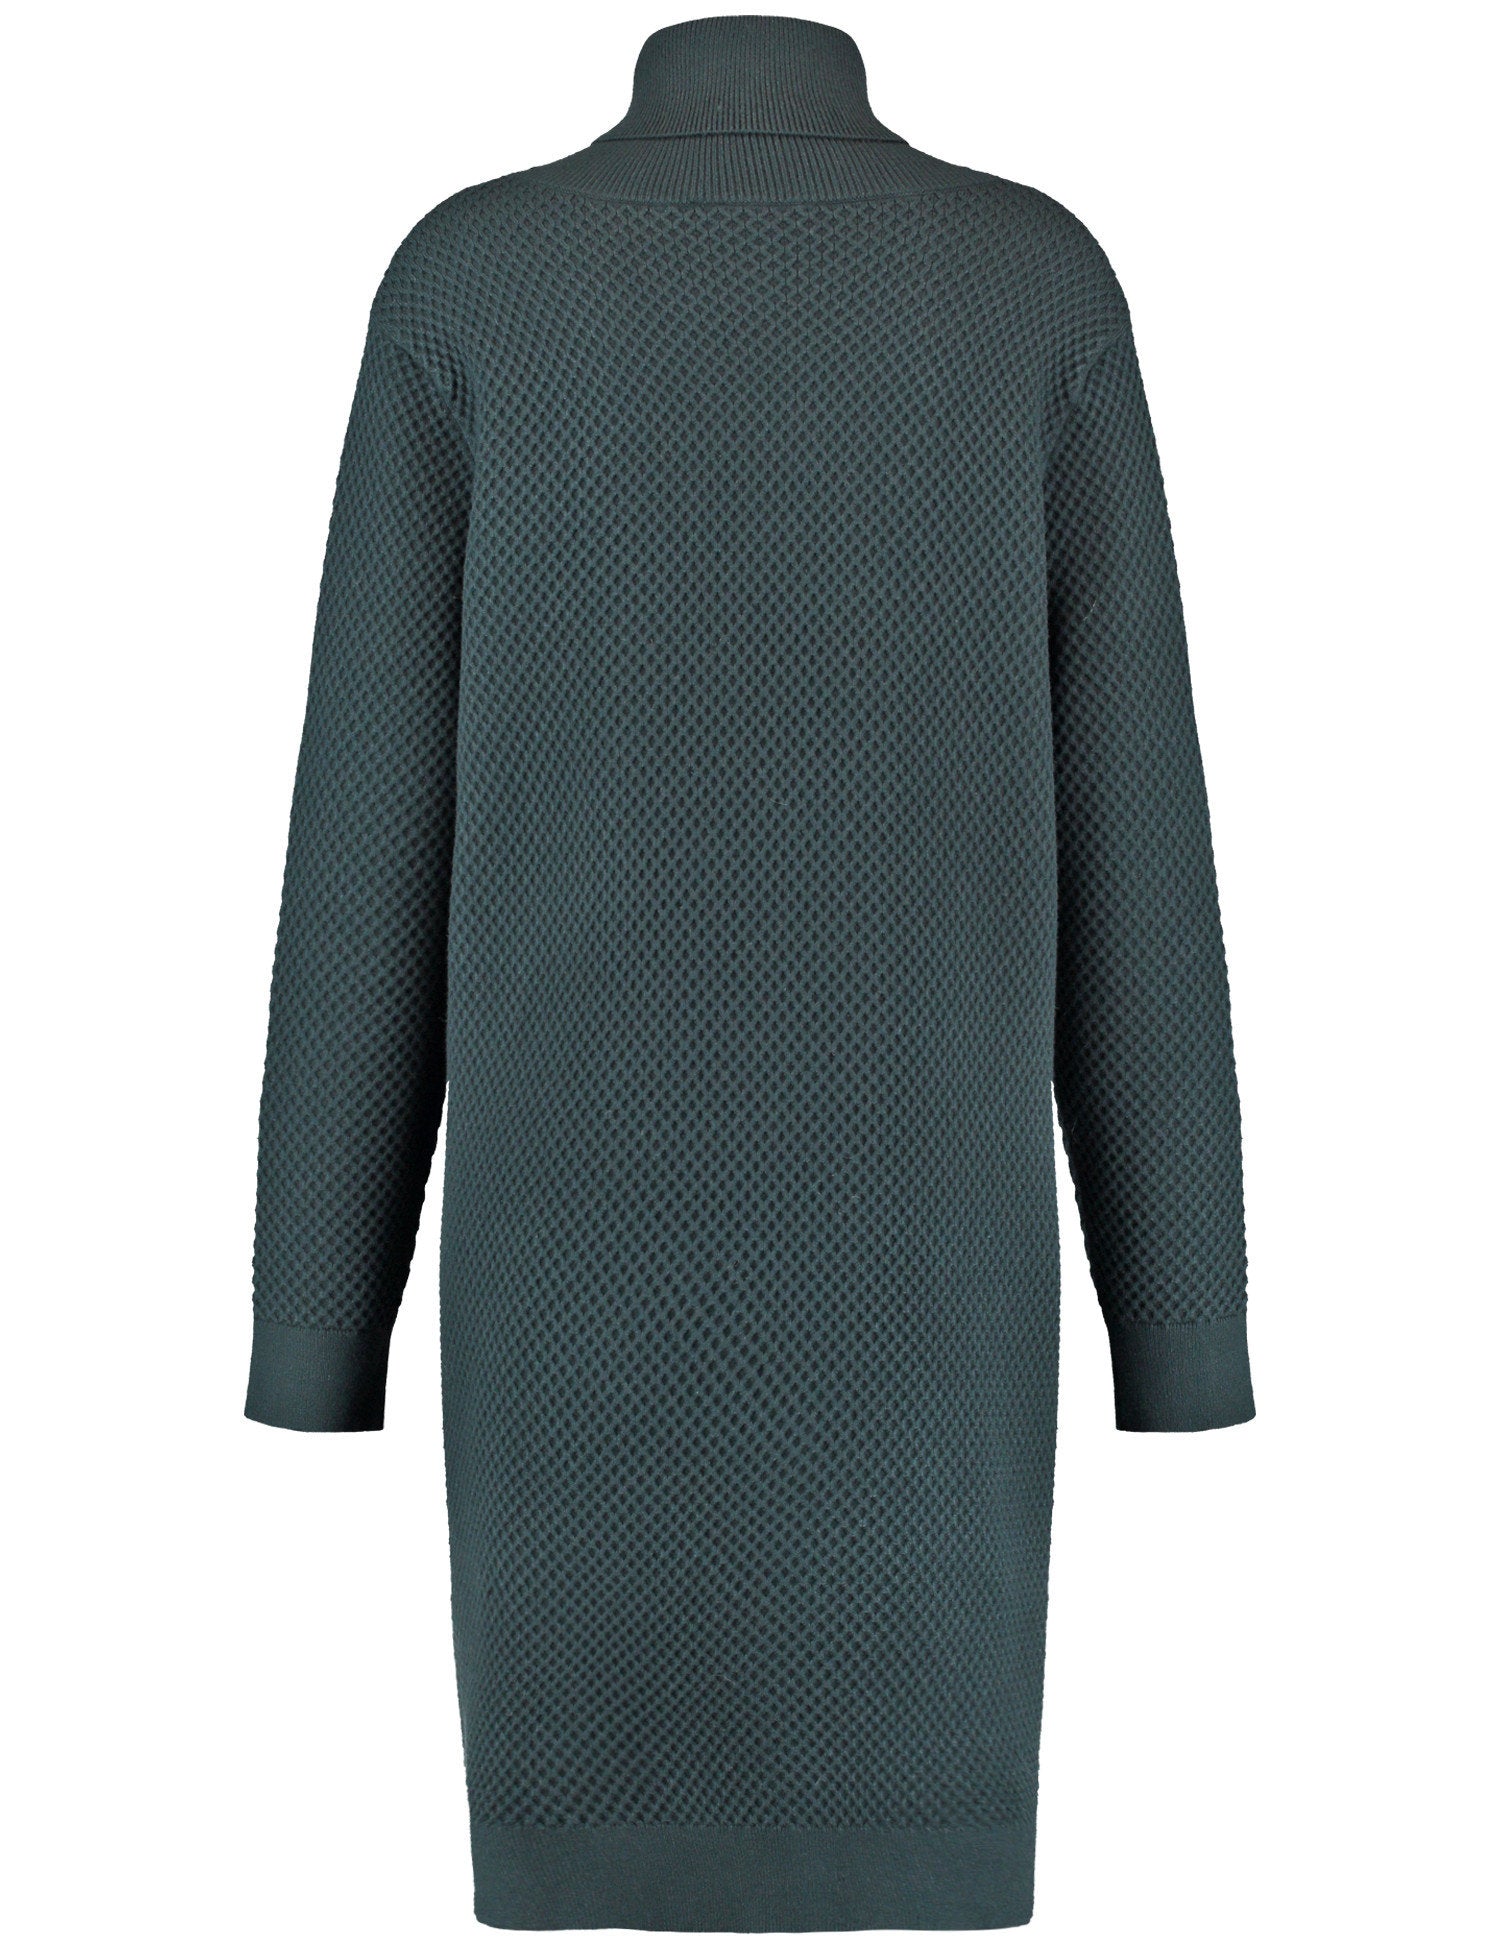 Knit Dress With A Polo Collar And A Button Detail On The Sleeves_280106-35713_50939_03